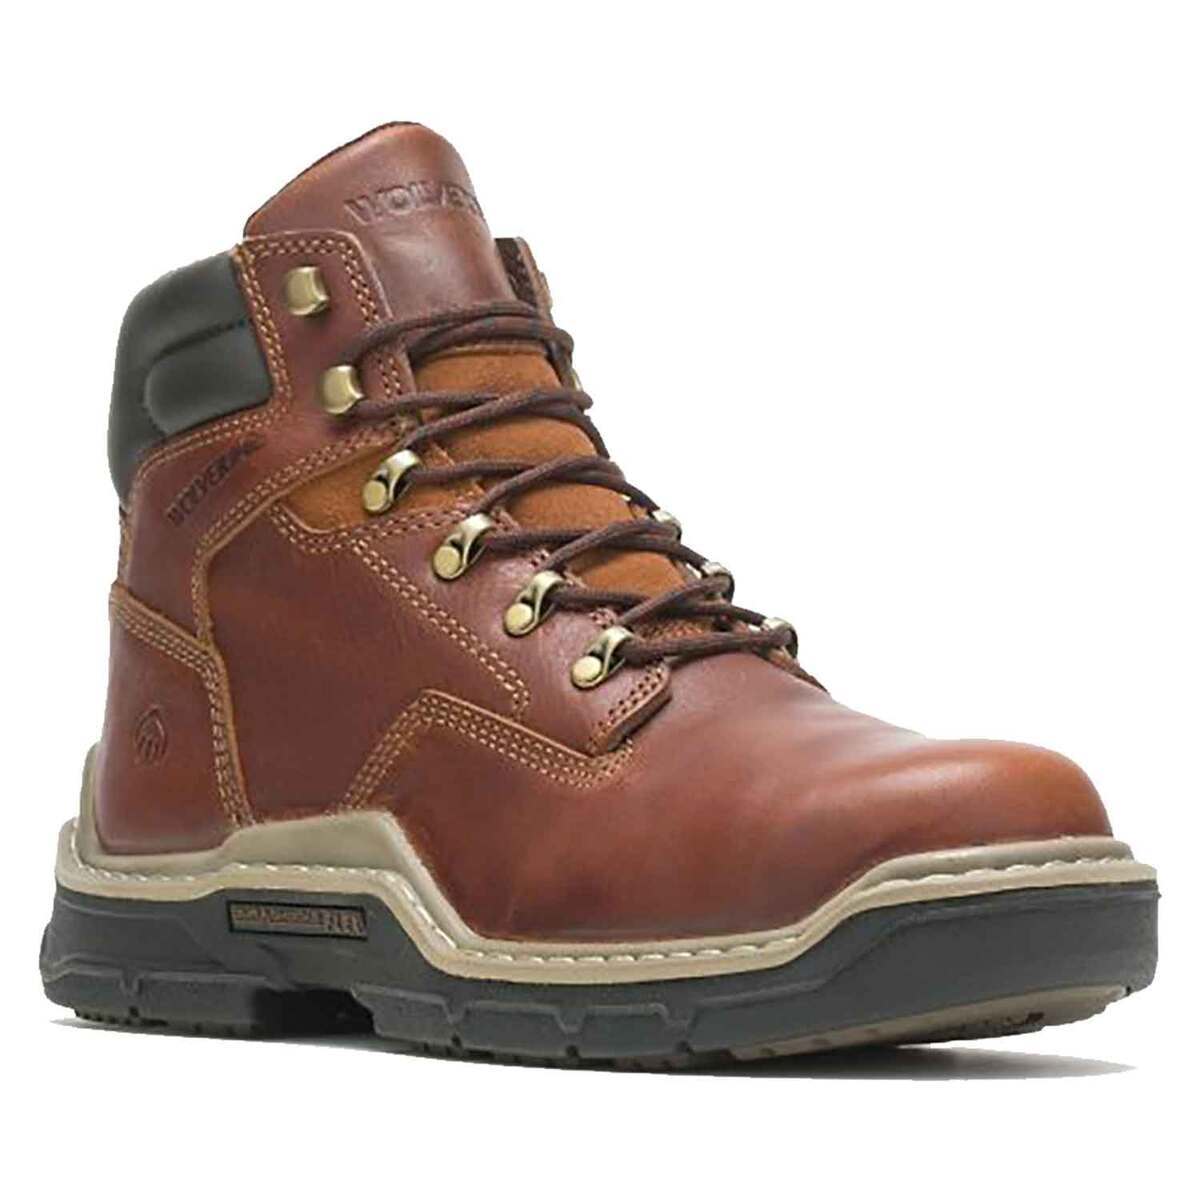 Carter Weatherproof Lace-up Boot, Men's Boots